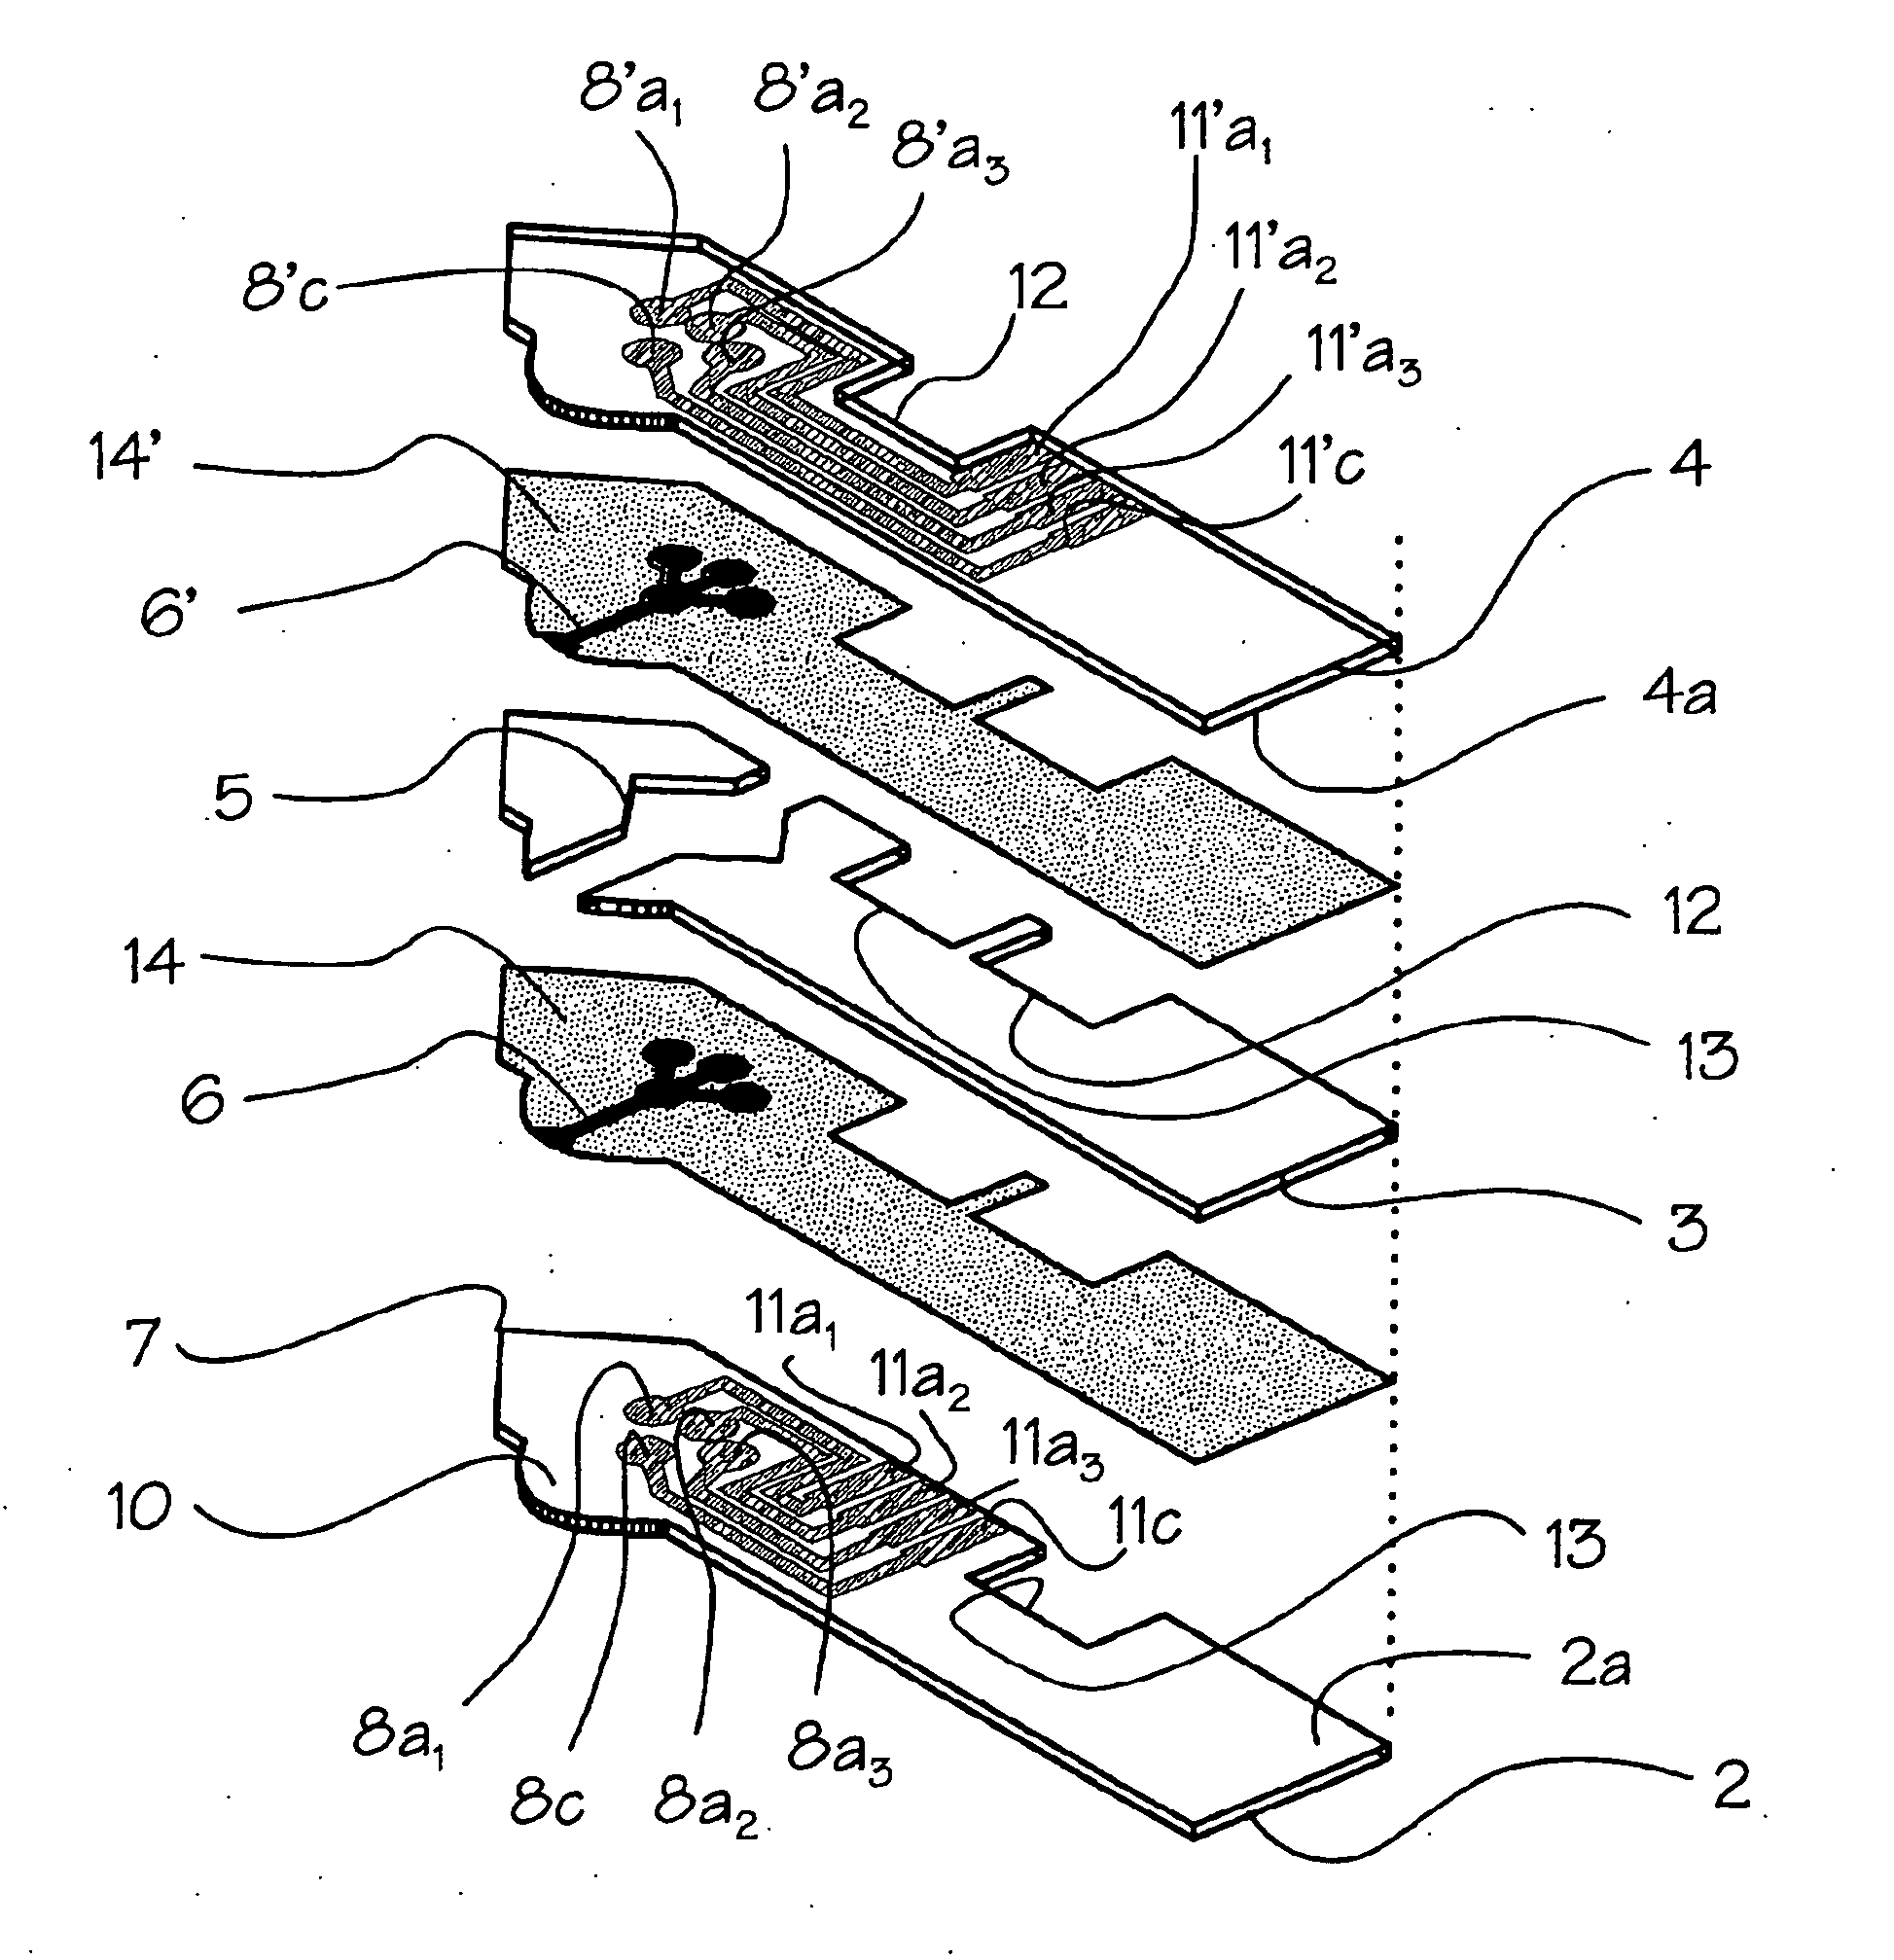 Analyte Test System for Determining the Concentration of an Analyte in a Physiological or Aqueous Fluid